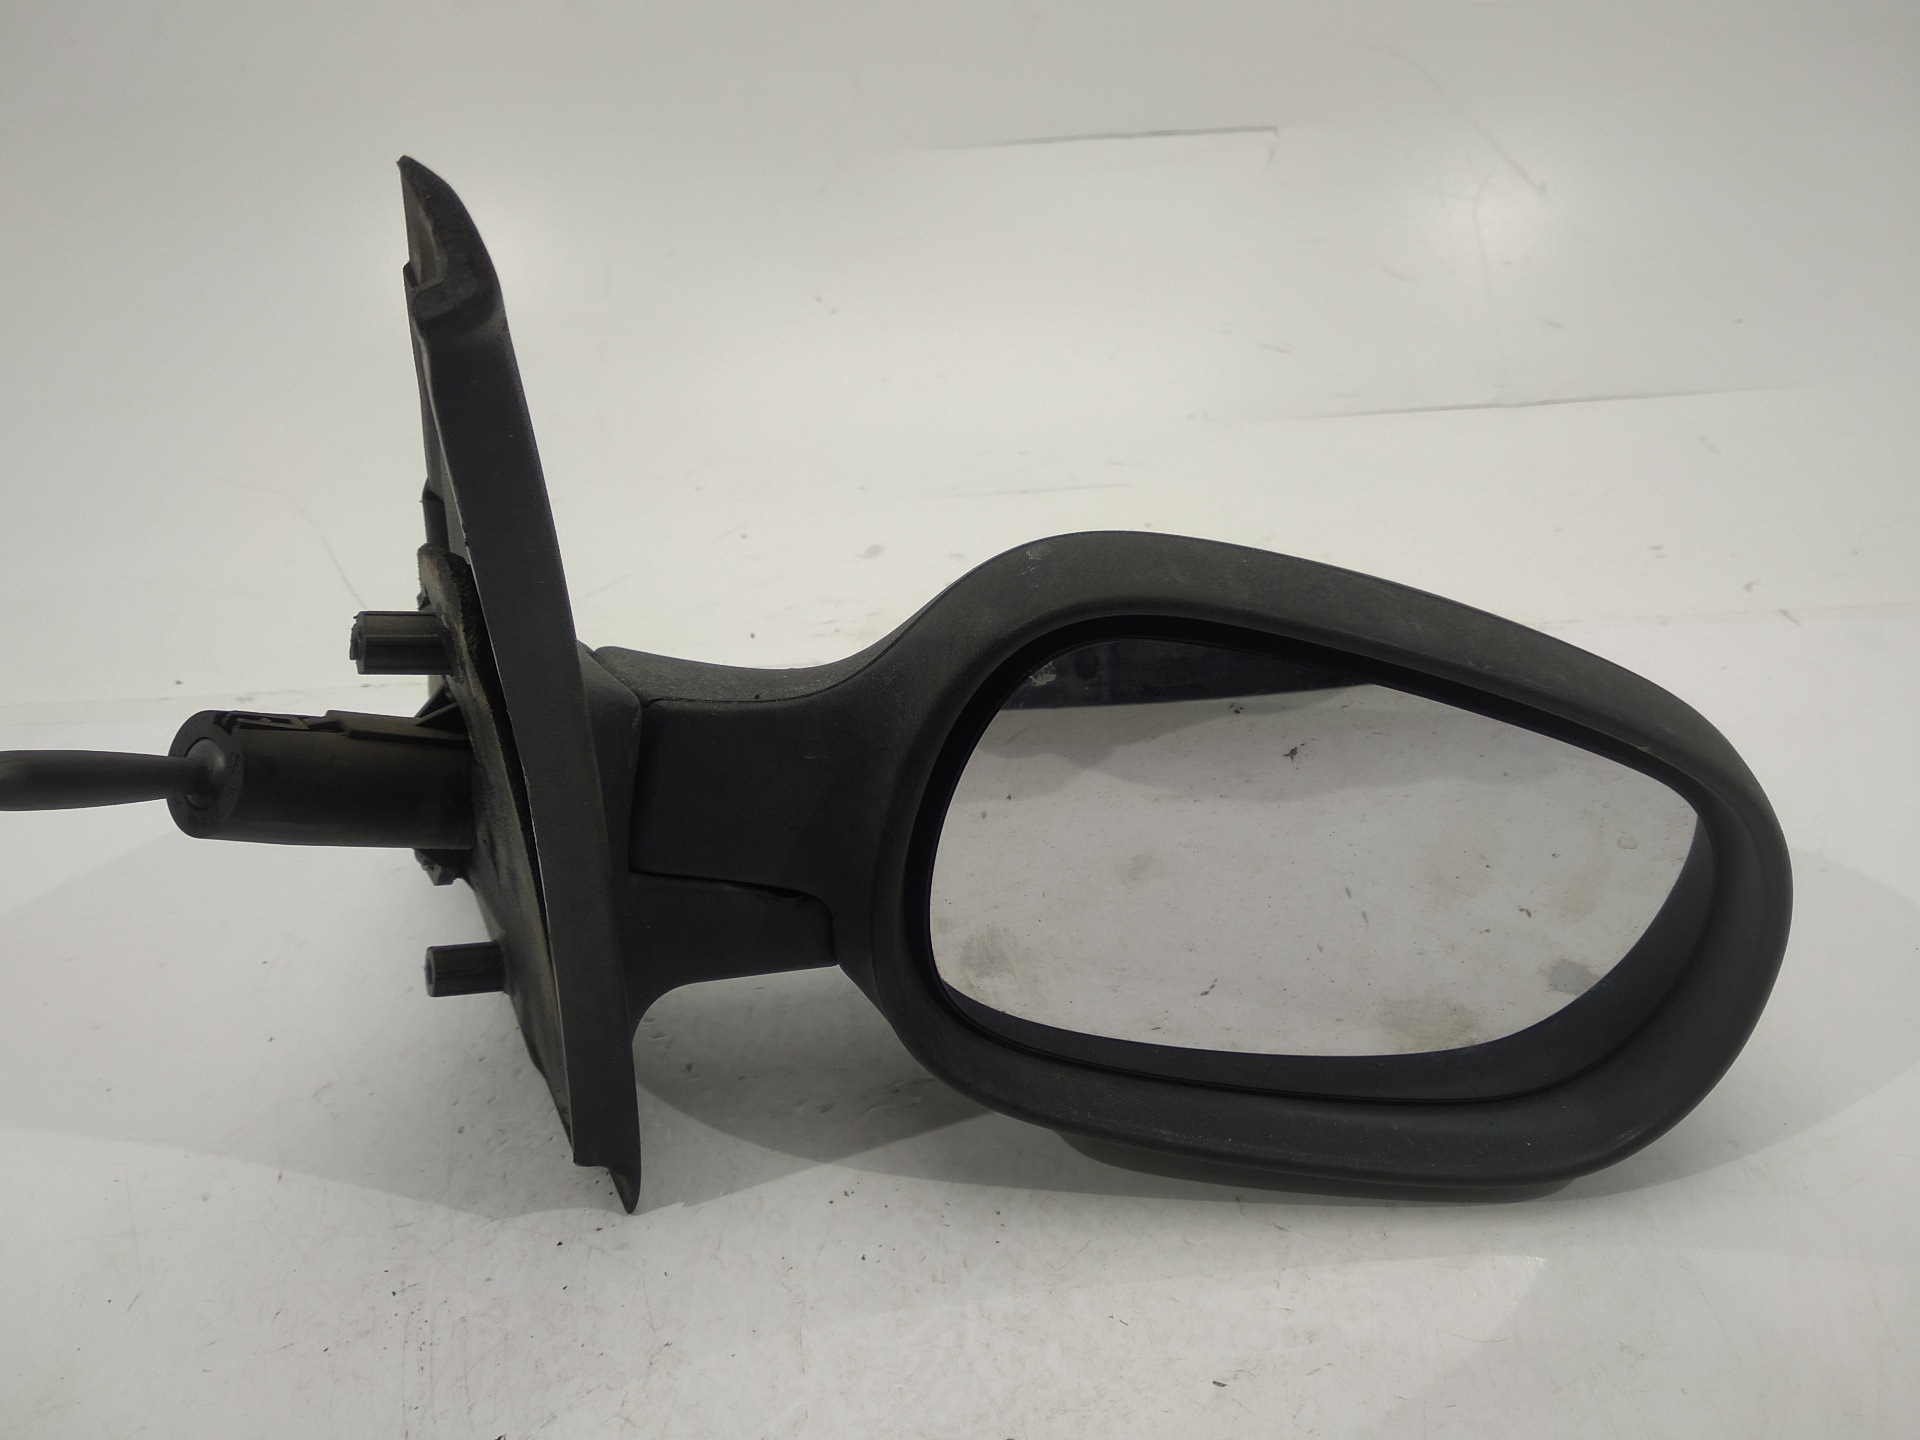 RENAULT Clio 3 generation (2005-2012) Right Side Wing Mirror 018011, 018011, 018011 24017969